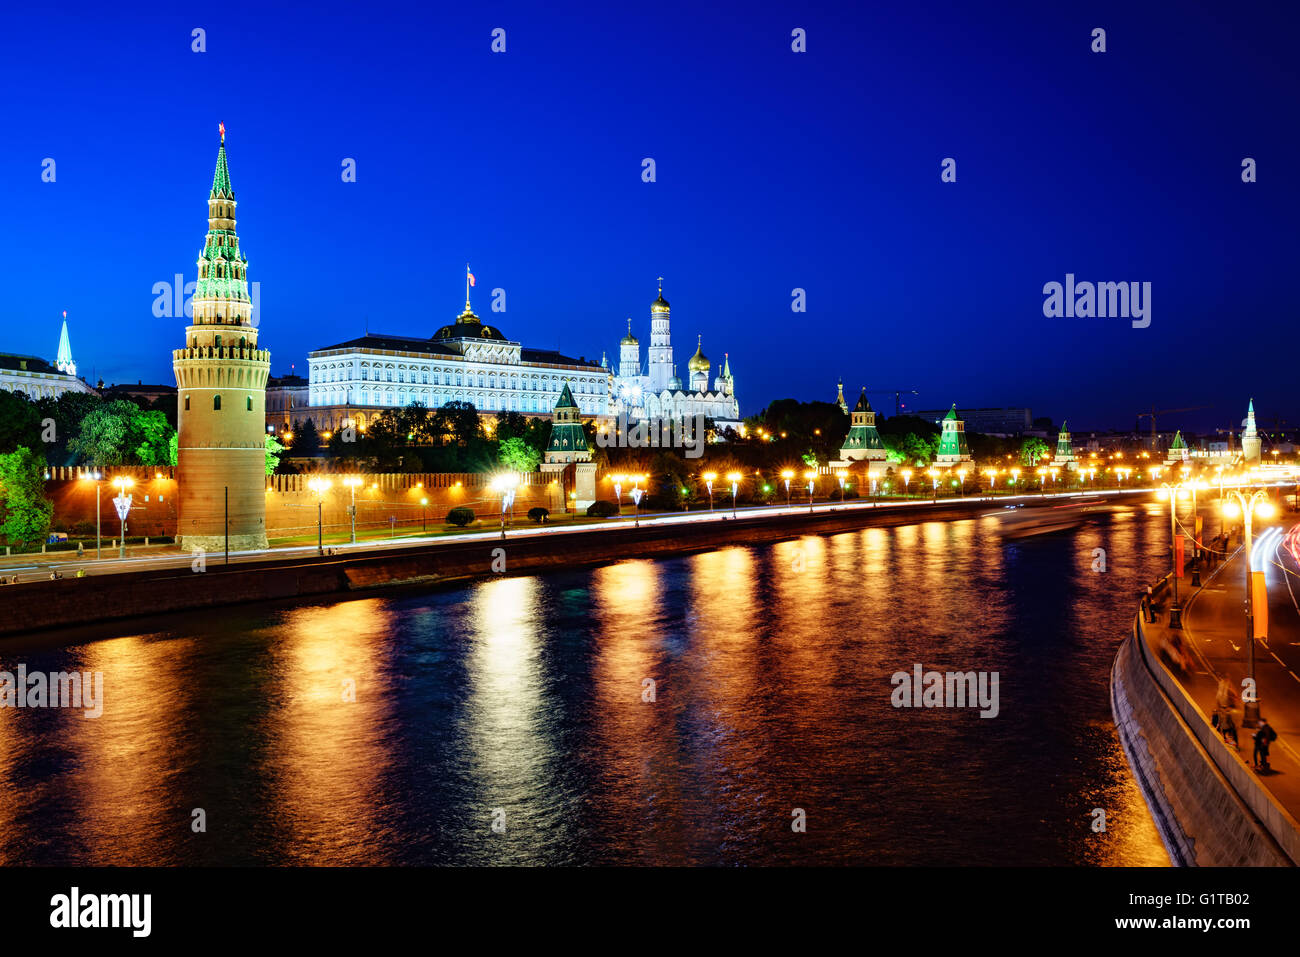 Russia - Moscow, night view of the Kremlin. Stock Photo